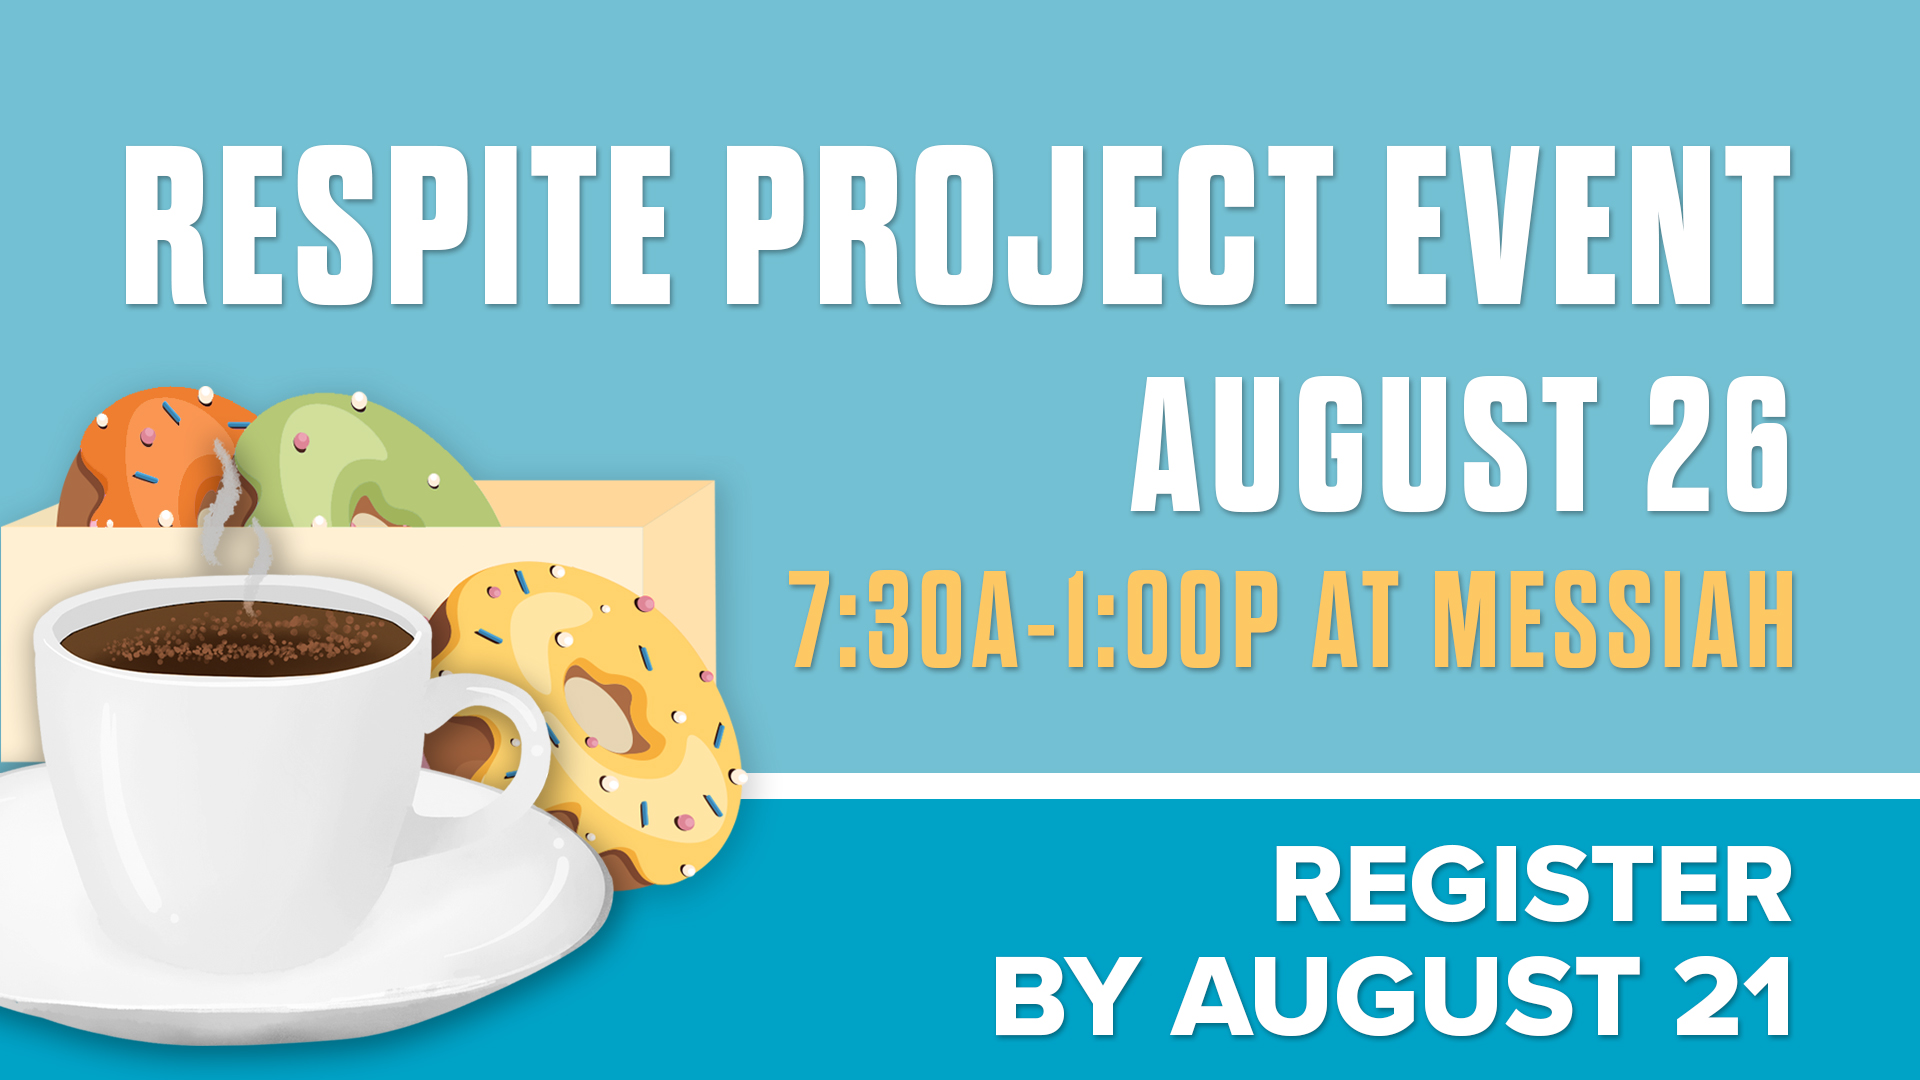 Respite Project Event August 26